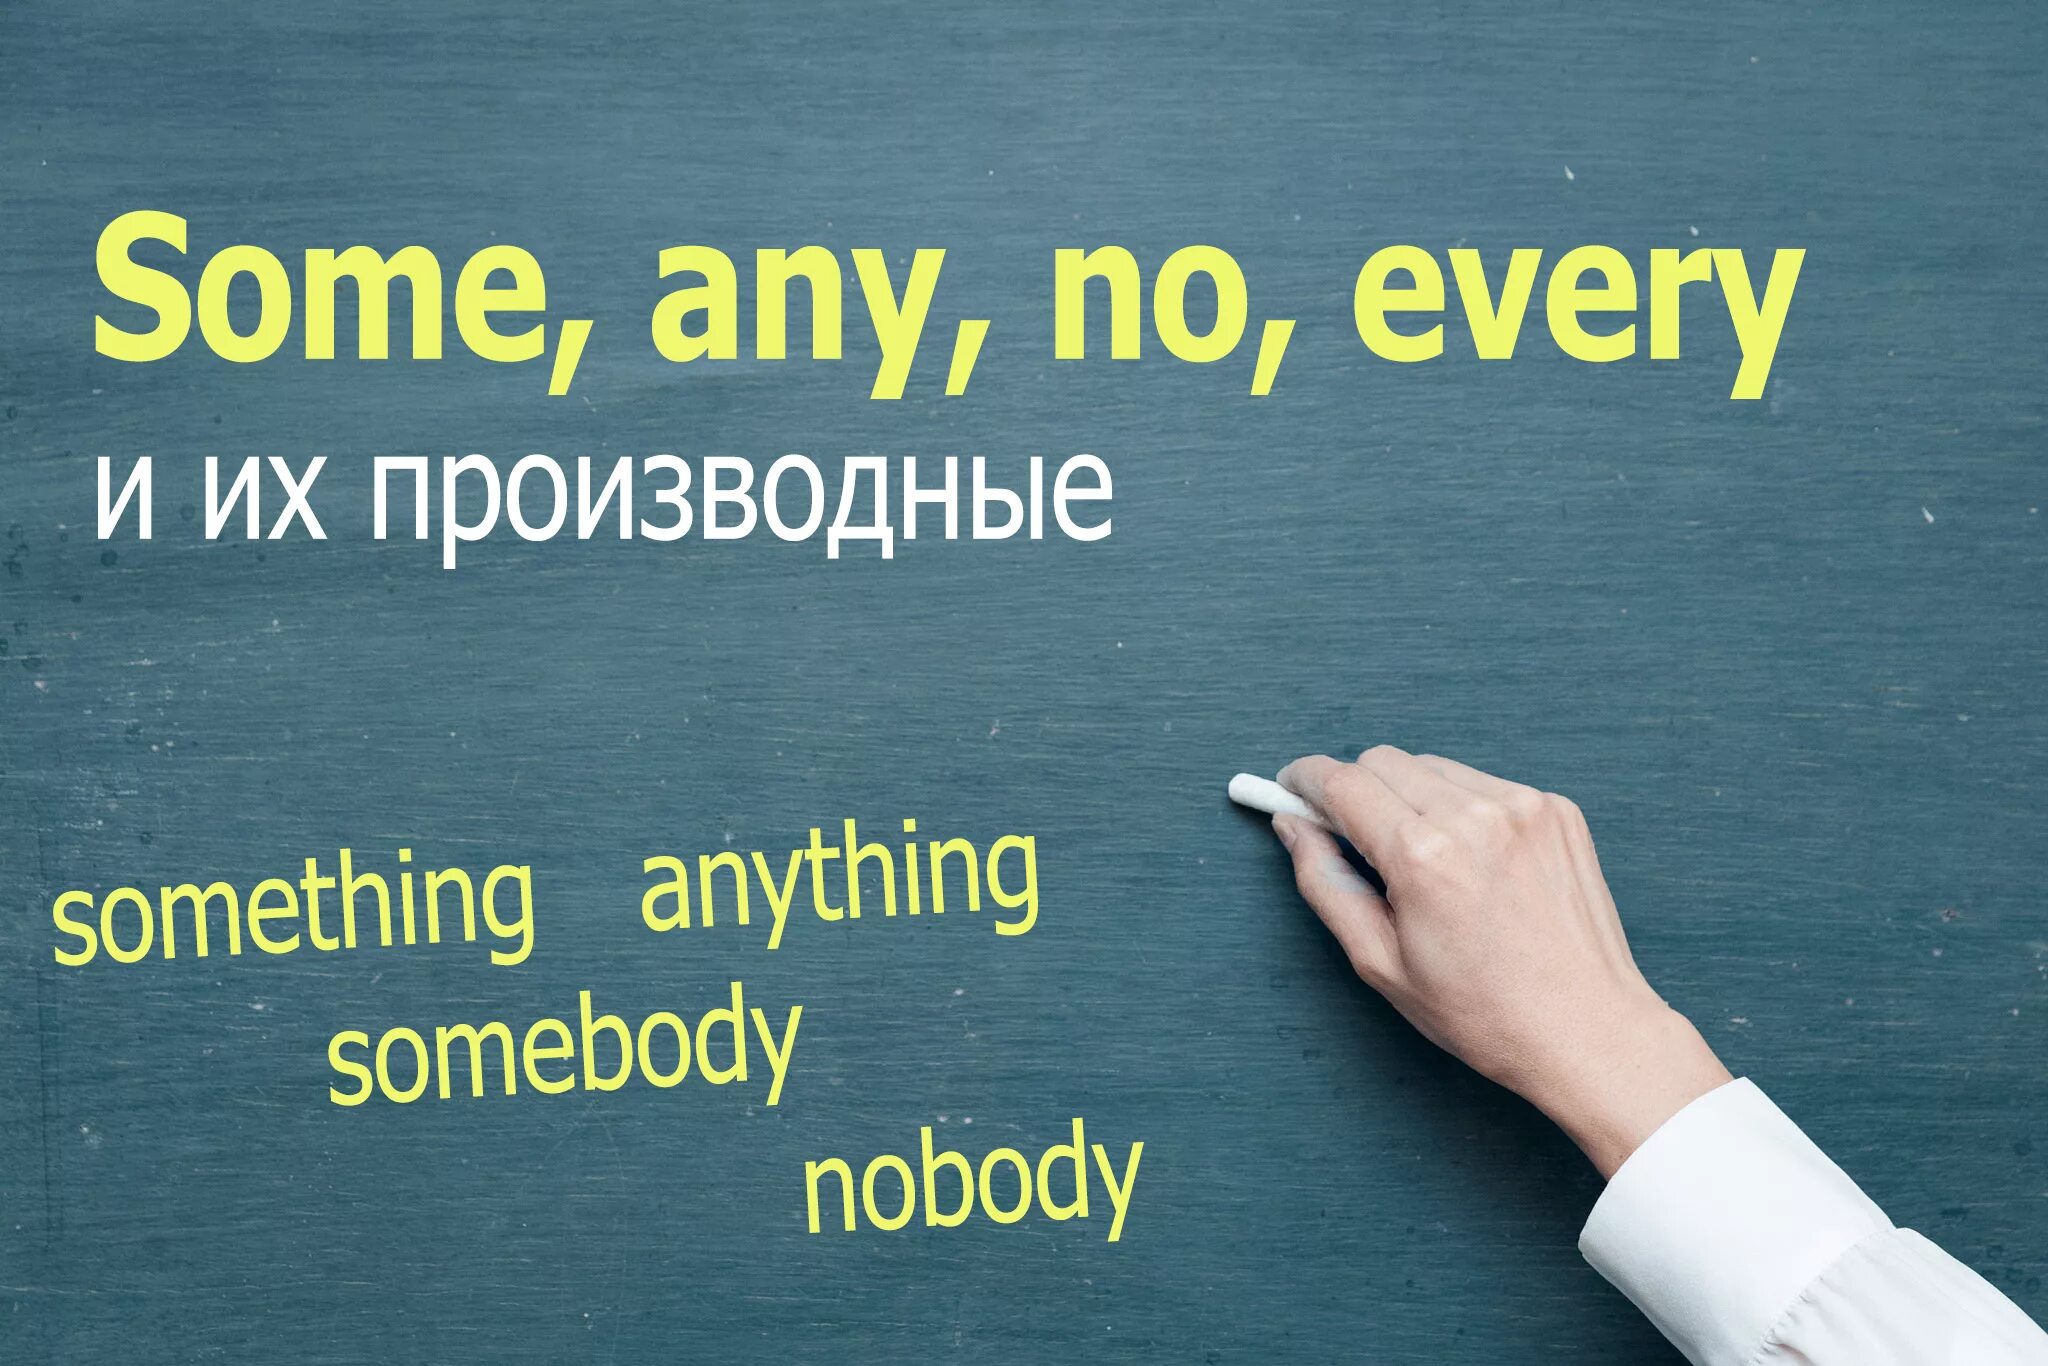 Anyone anything someone something. Some any every правило. Местоимения some any no every. Употребление some any no every. Some any no every правило.